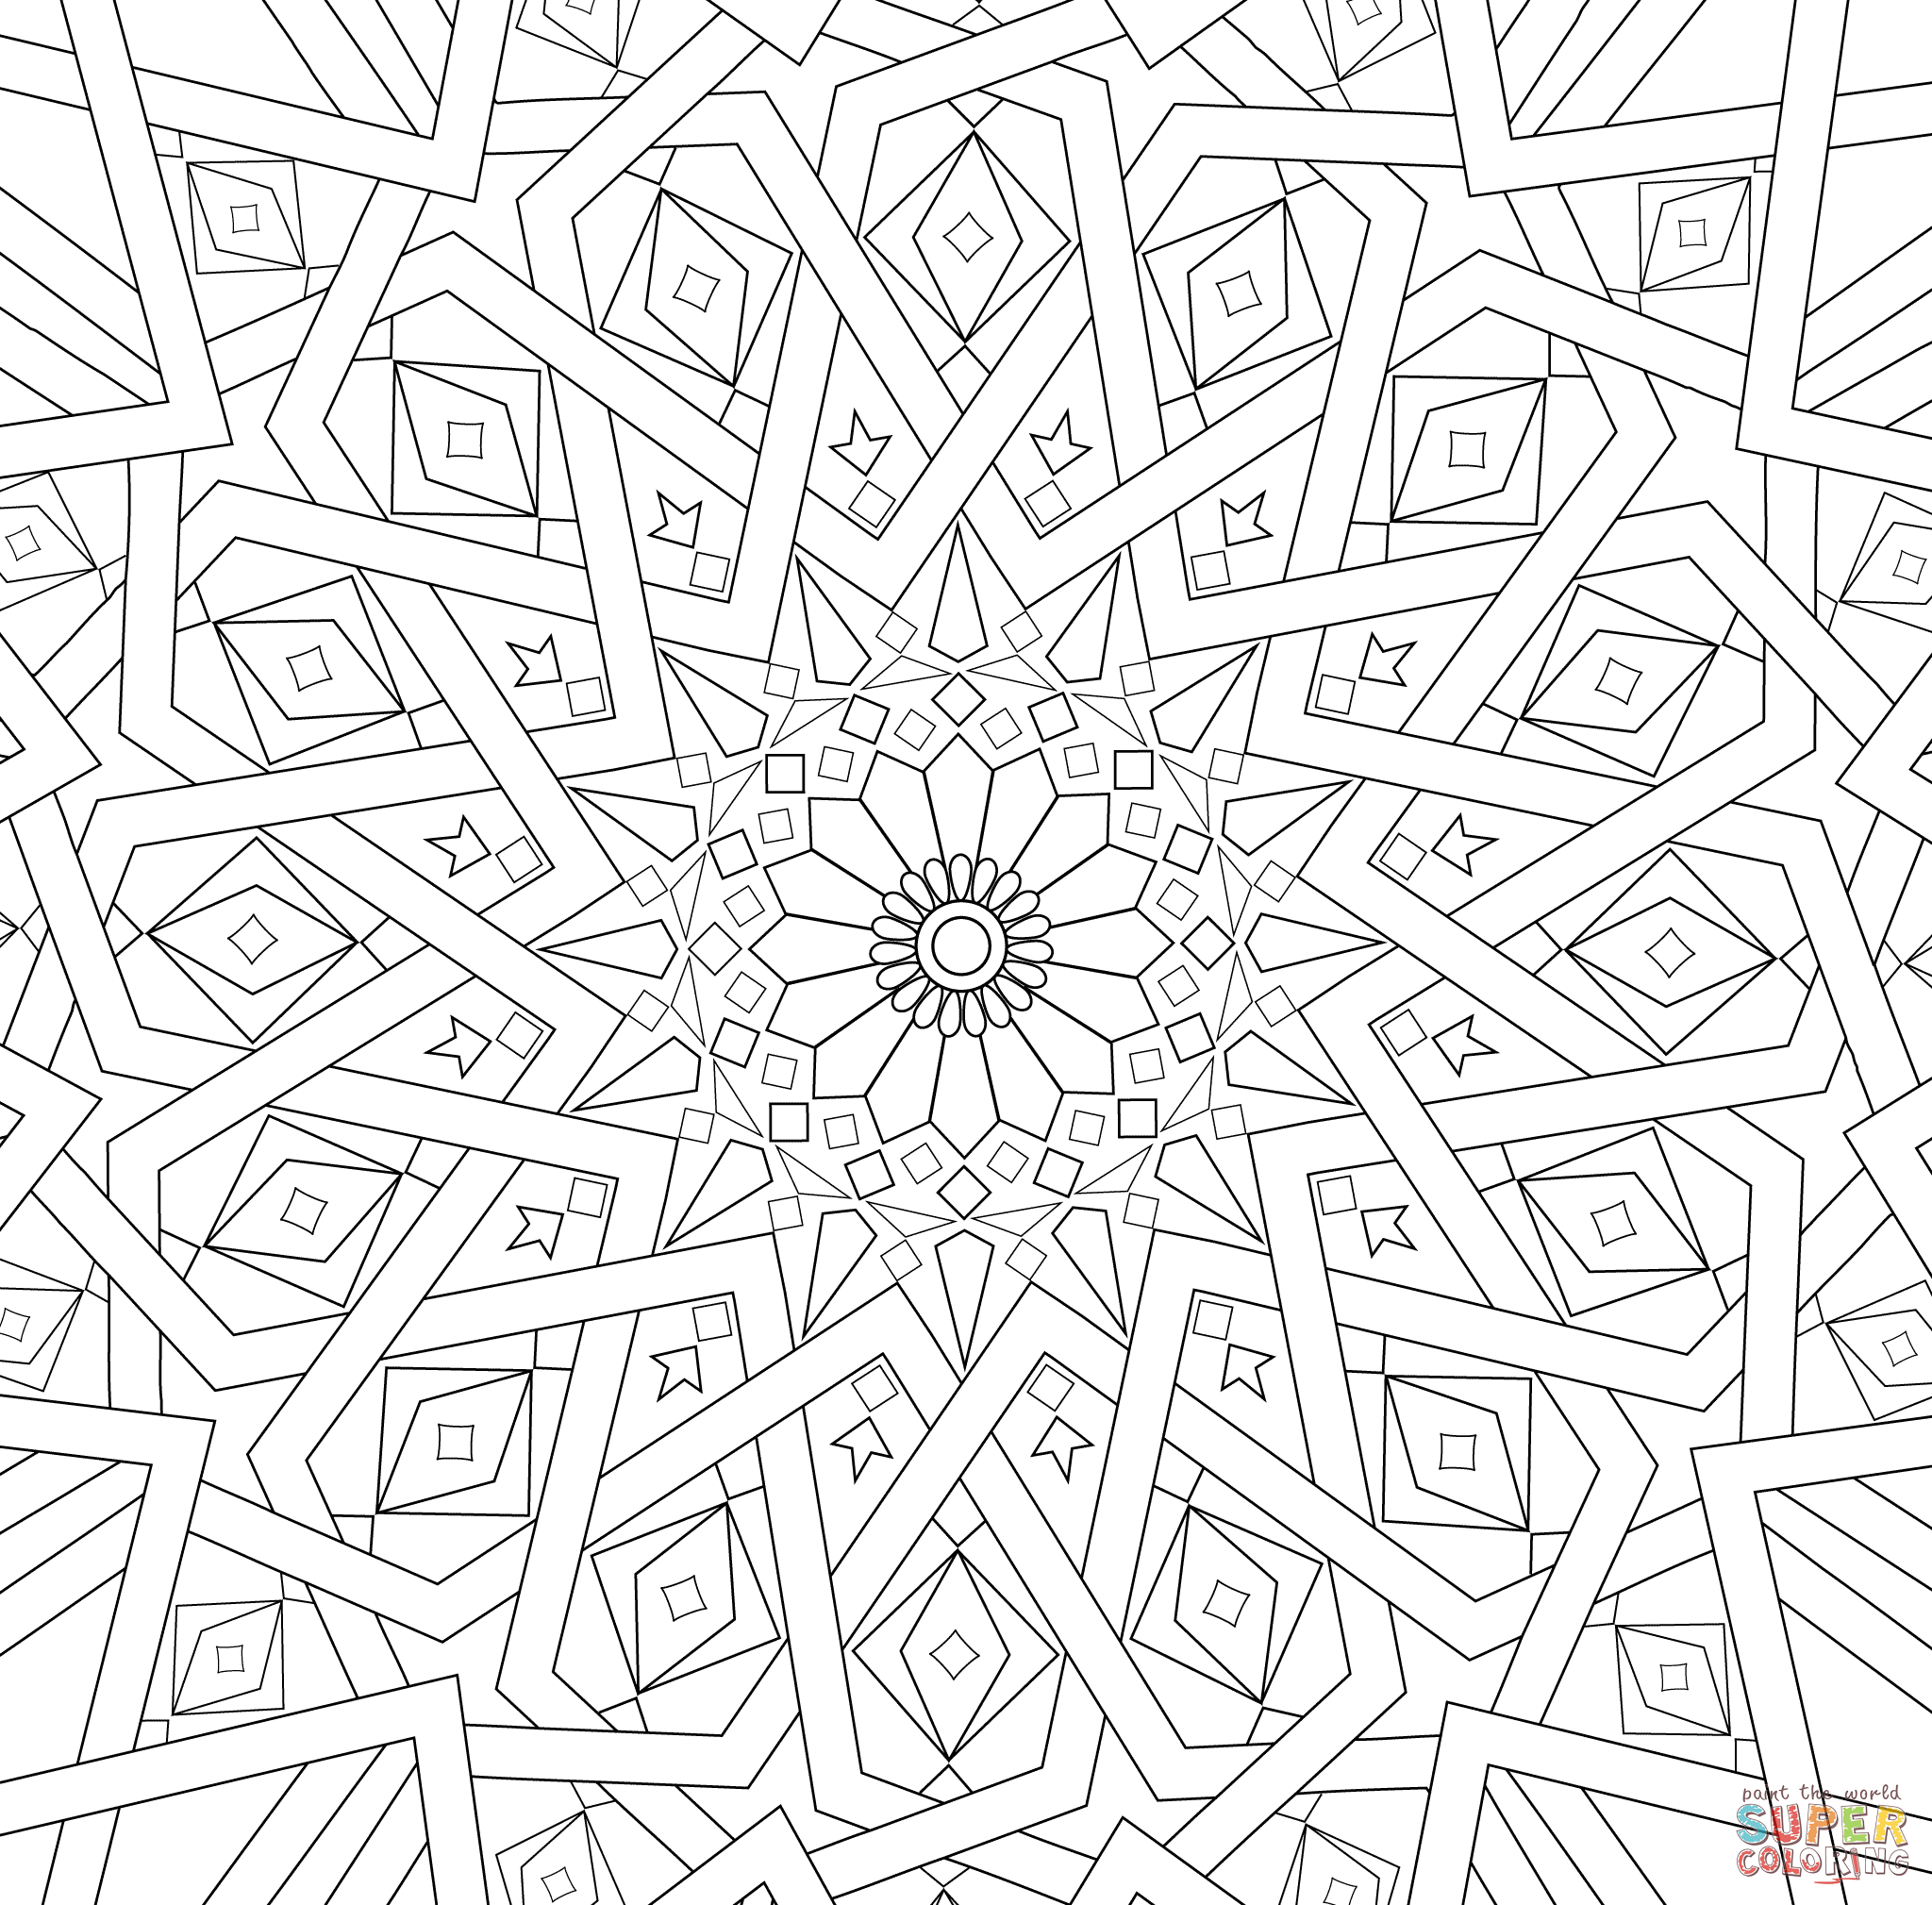  Mosaic Coloring Pages - Free Mosaic Patterns Coloring